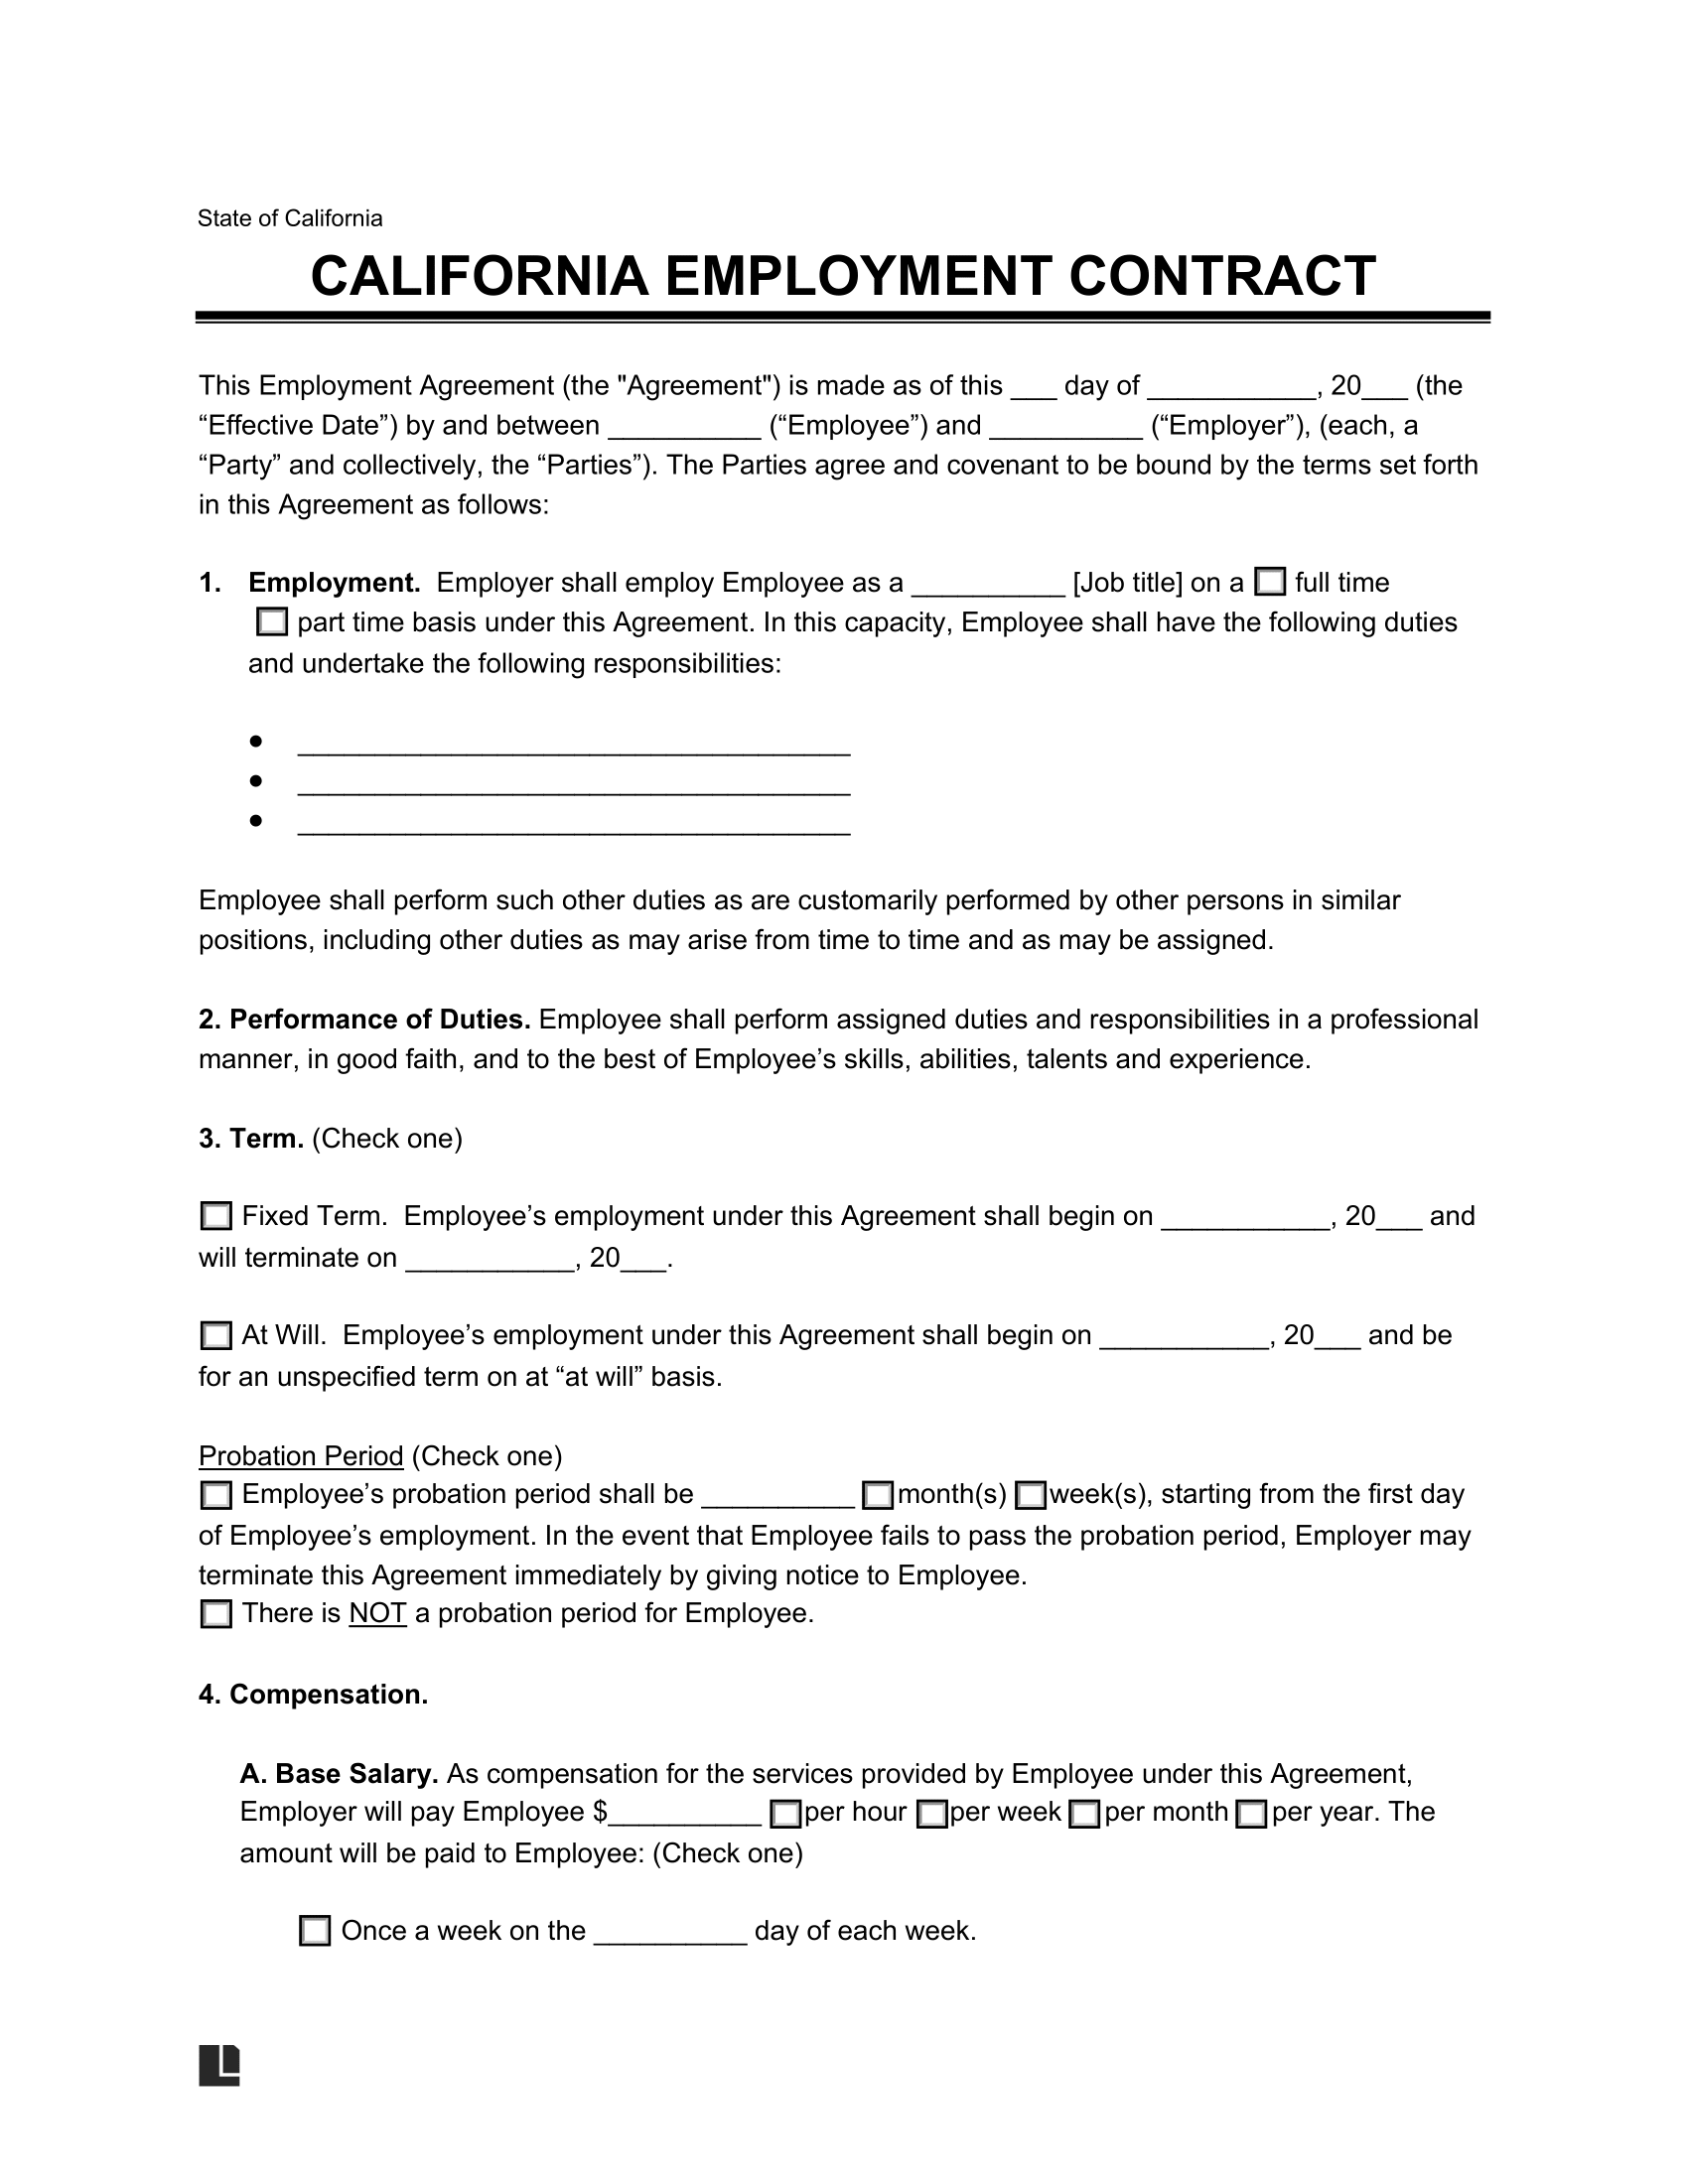 california employment contract template